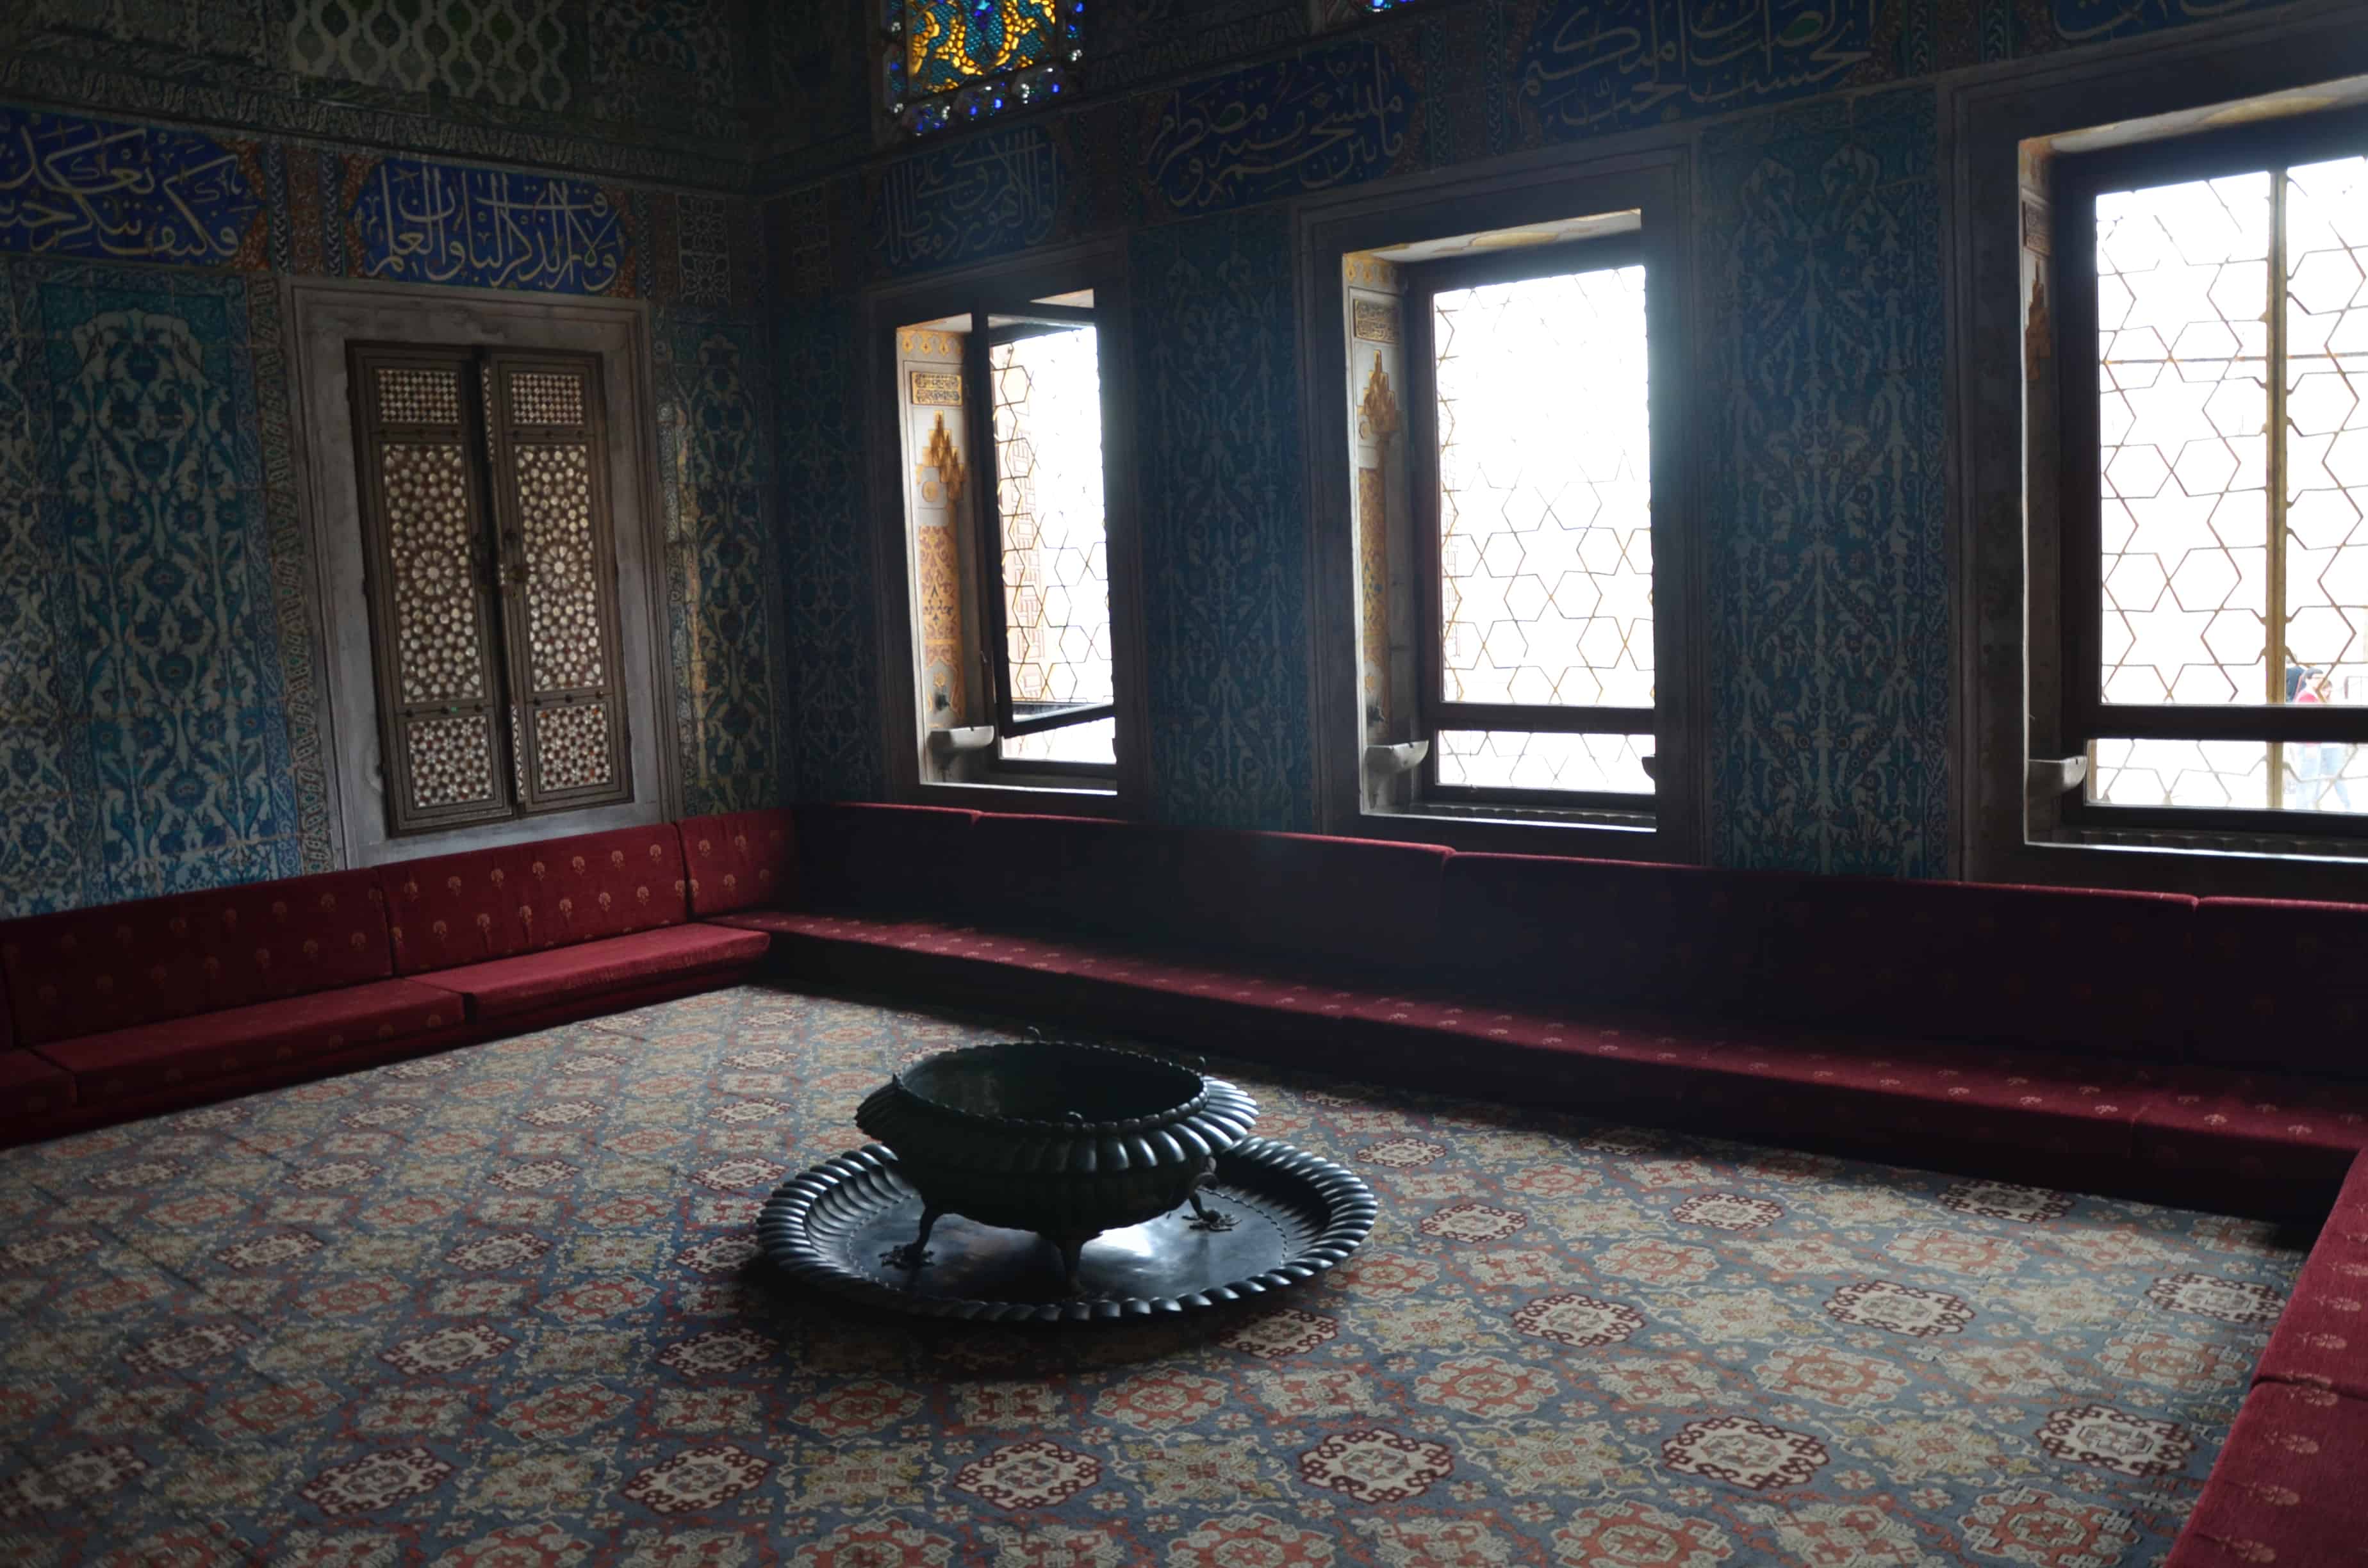 Domed room of the Twin Kiosk in the Imperial Harem at Topkapi Palace in Istanbul, Turkey